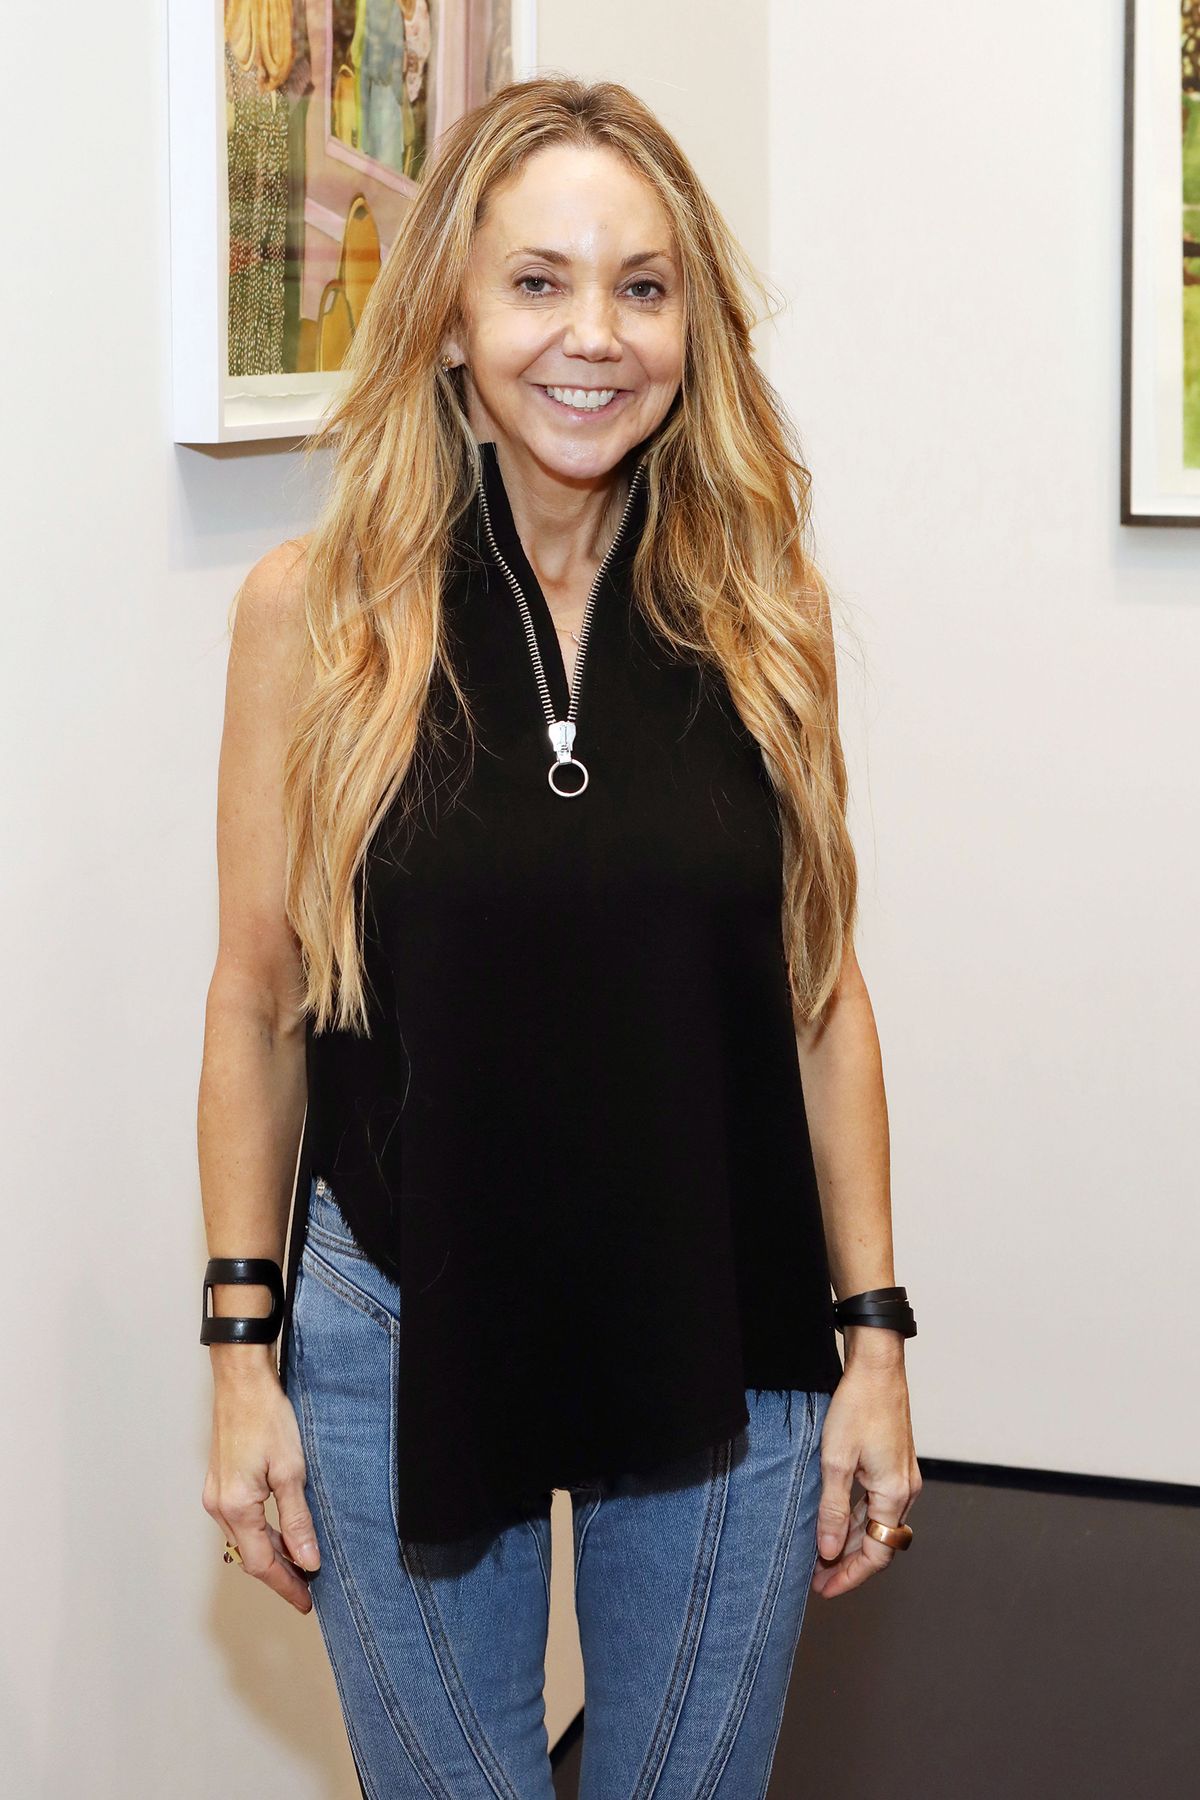 Former art adviser Lisa Schiff is facing two civil lawsuits relating to accusations that she defrauded clients Photo: Udo Salters/Patrick McMullan via Getty Images